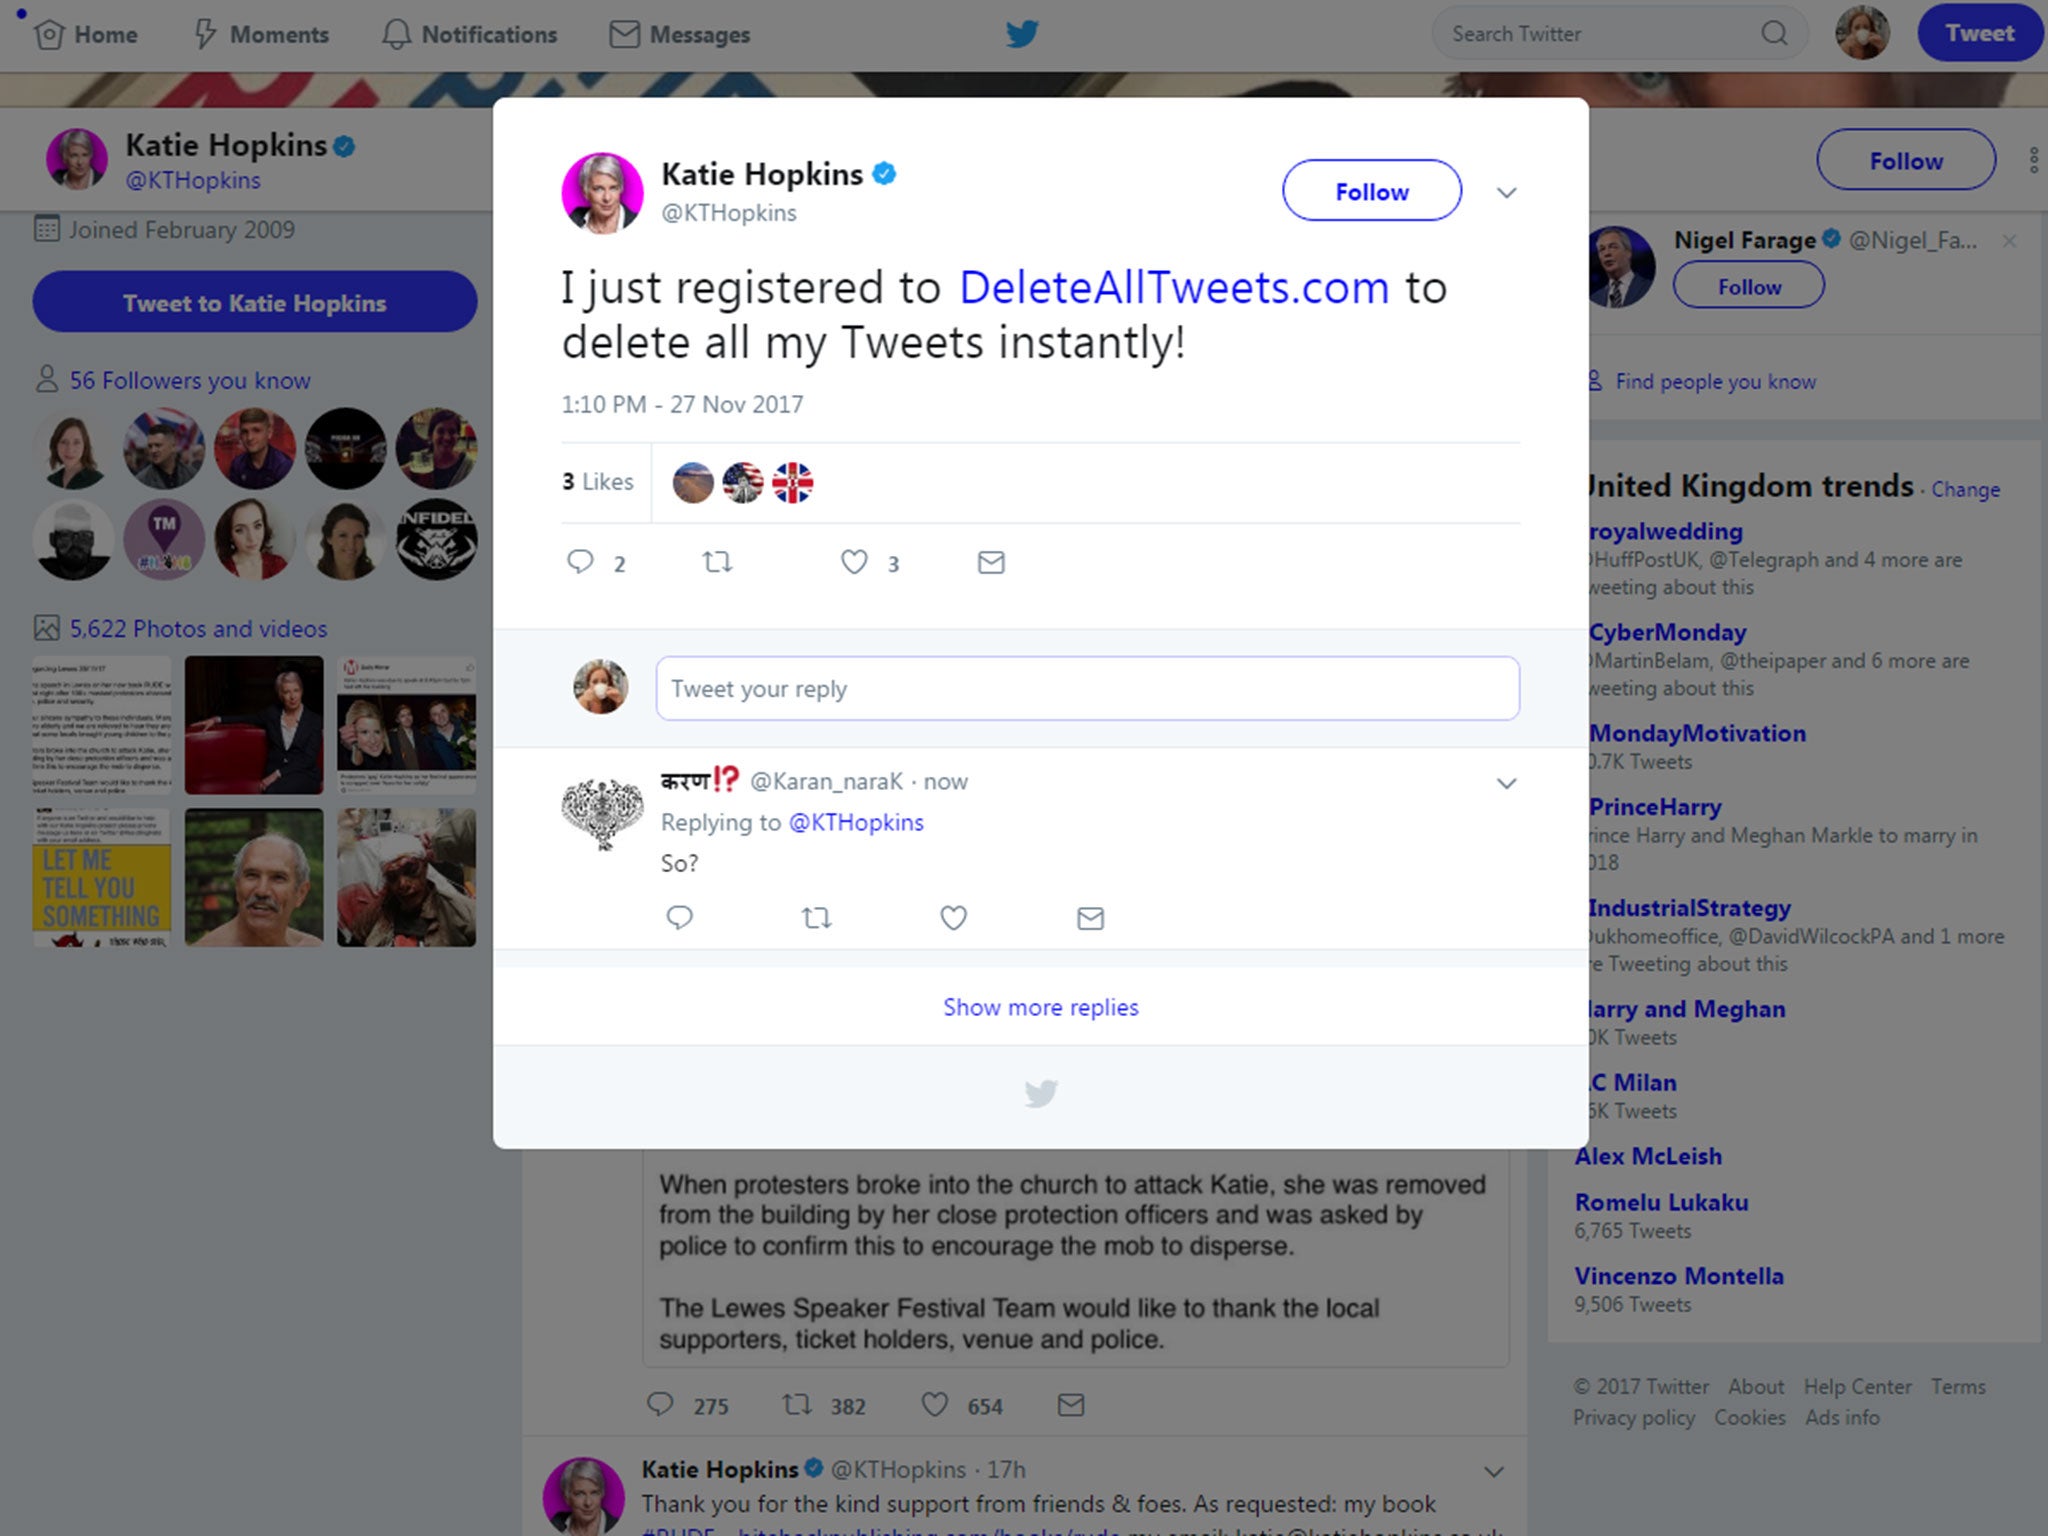 A tweet that appeared on Katie Hopkins' account shortly before her tweets disappeared on 27 November